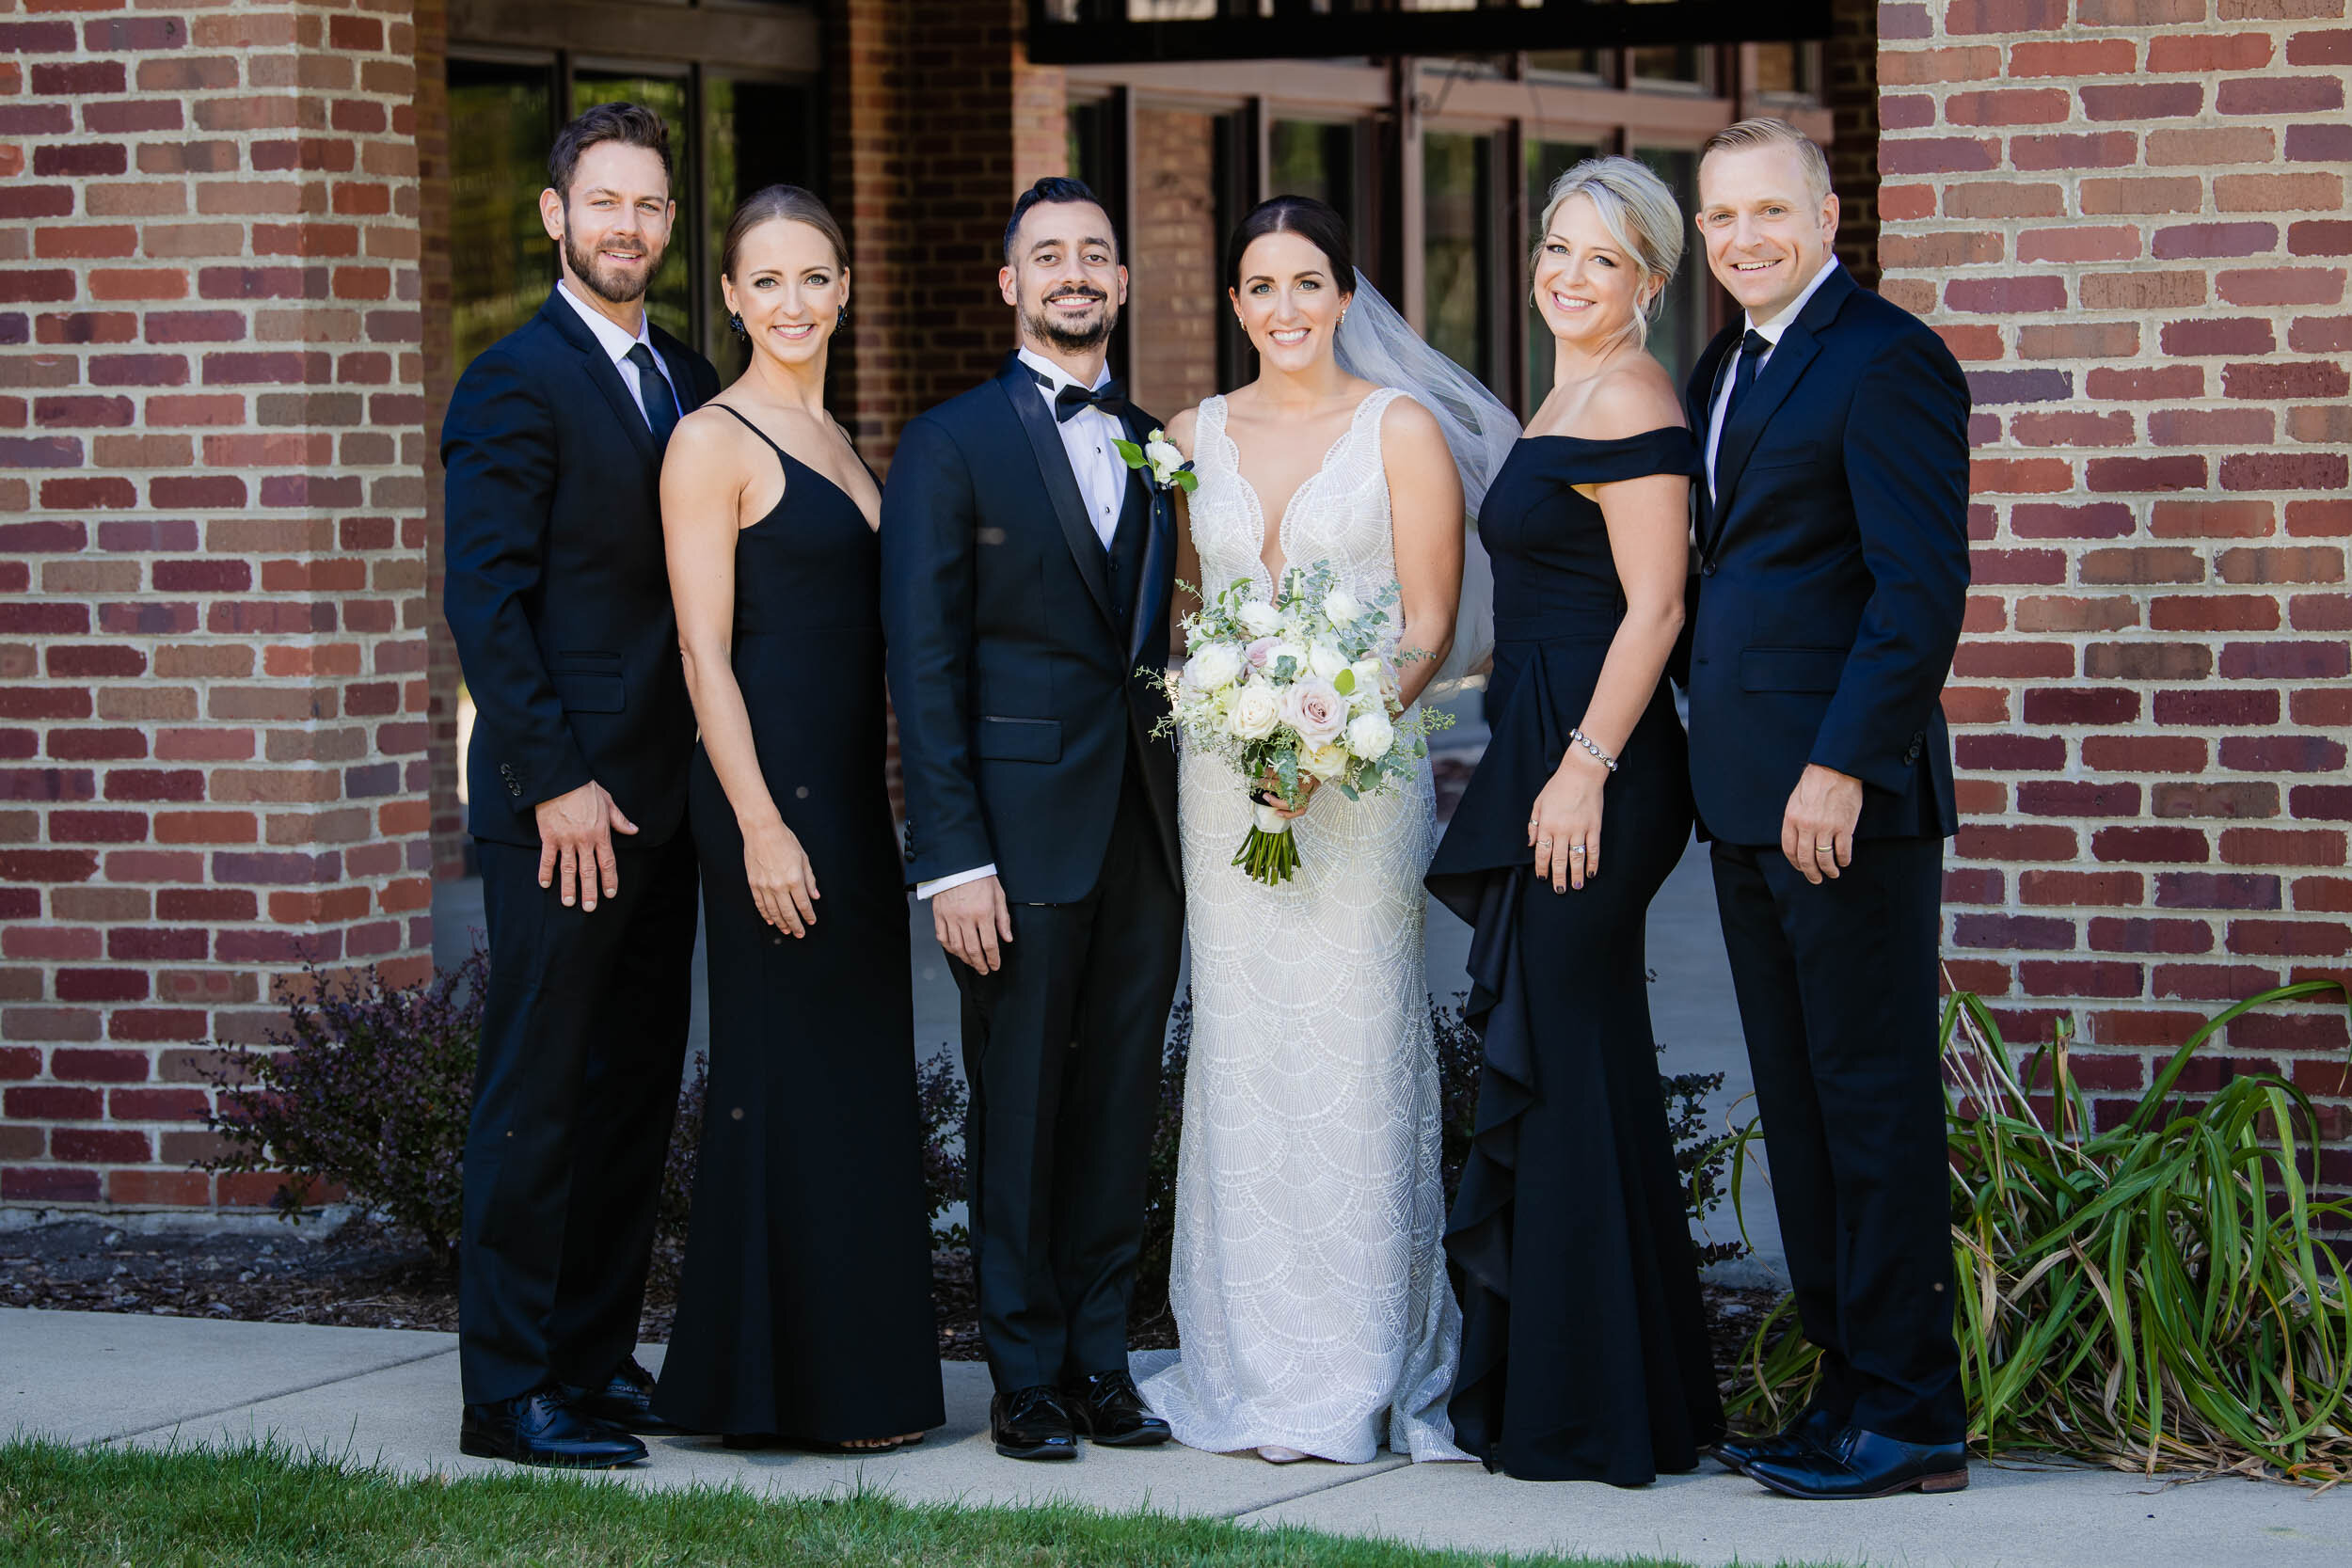 Wedding day portrait with family: Chicago wedding photography by J. Brown Photography.